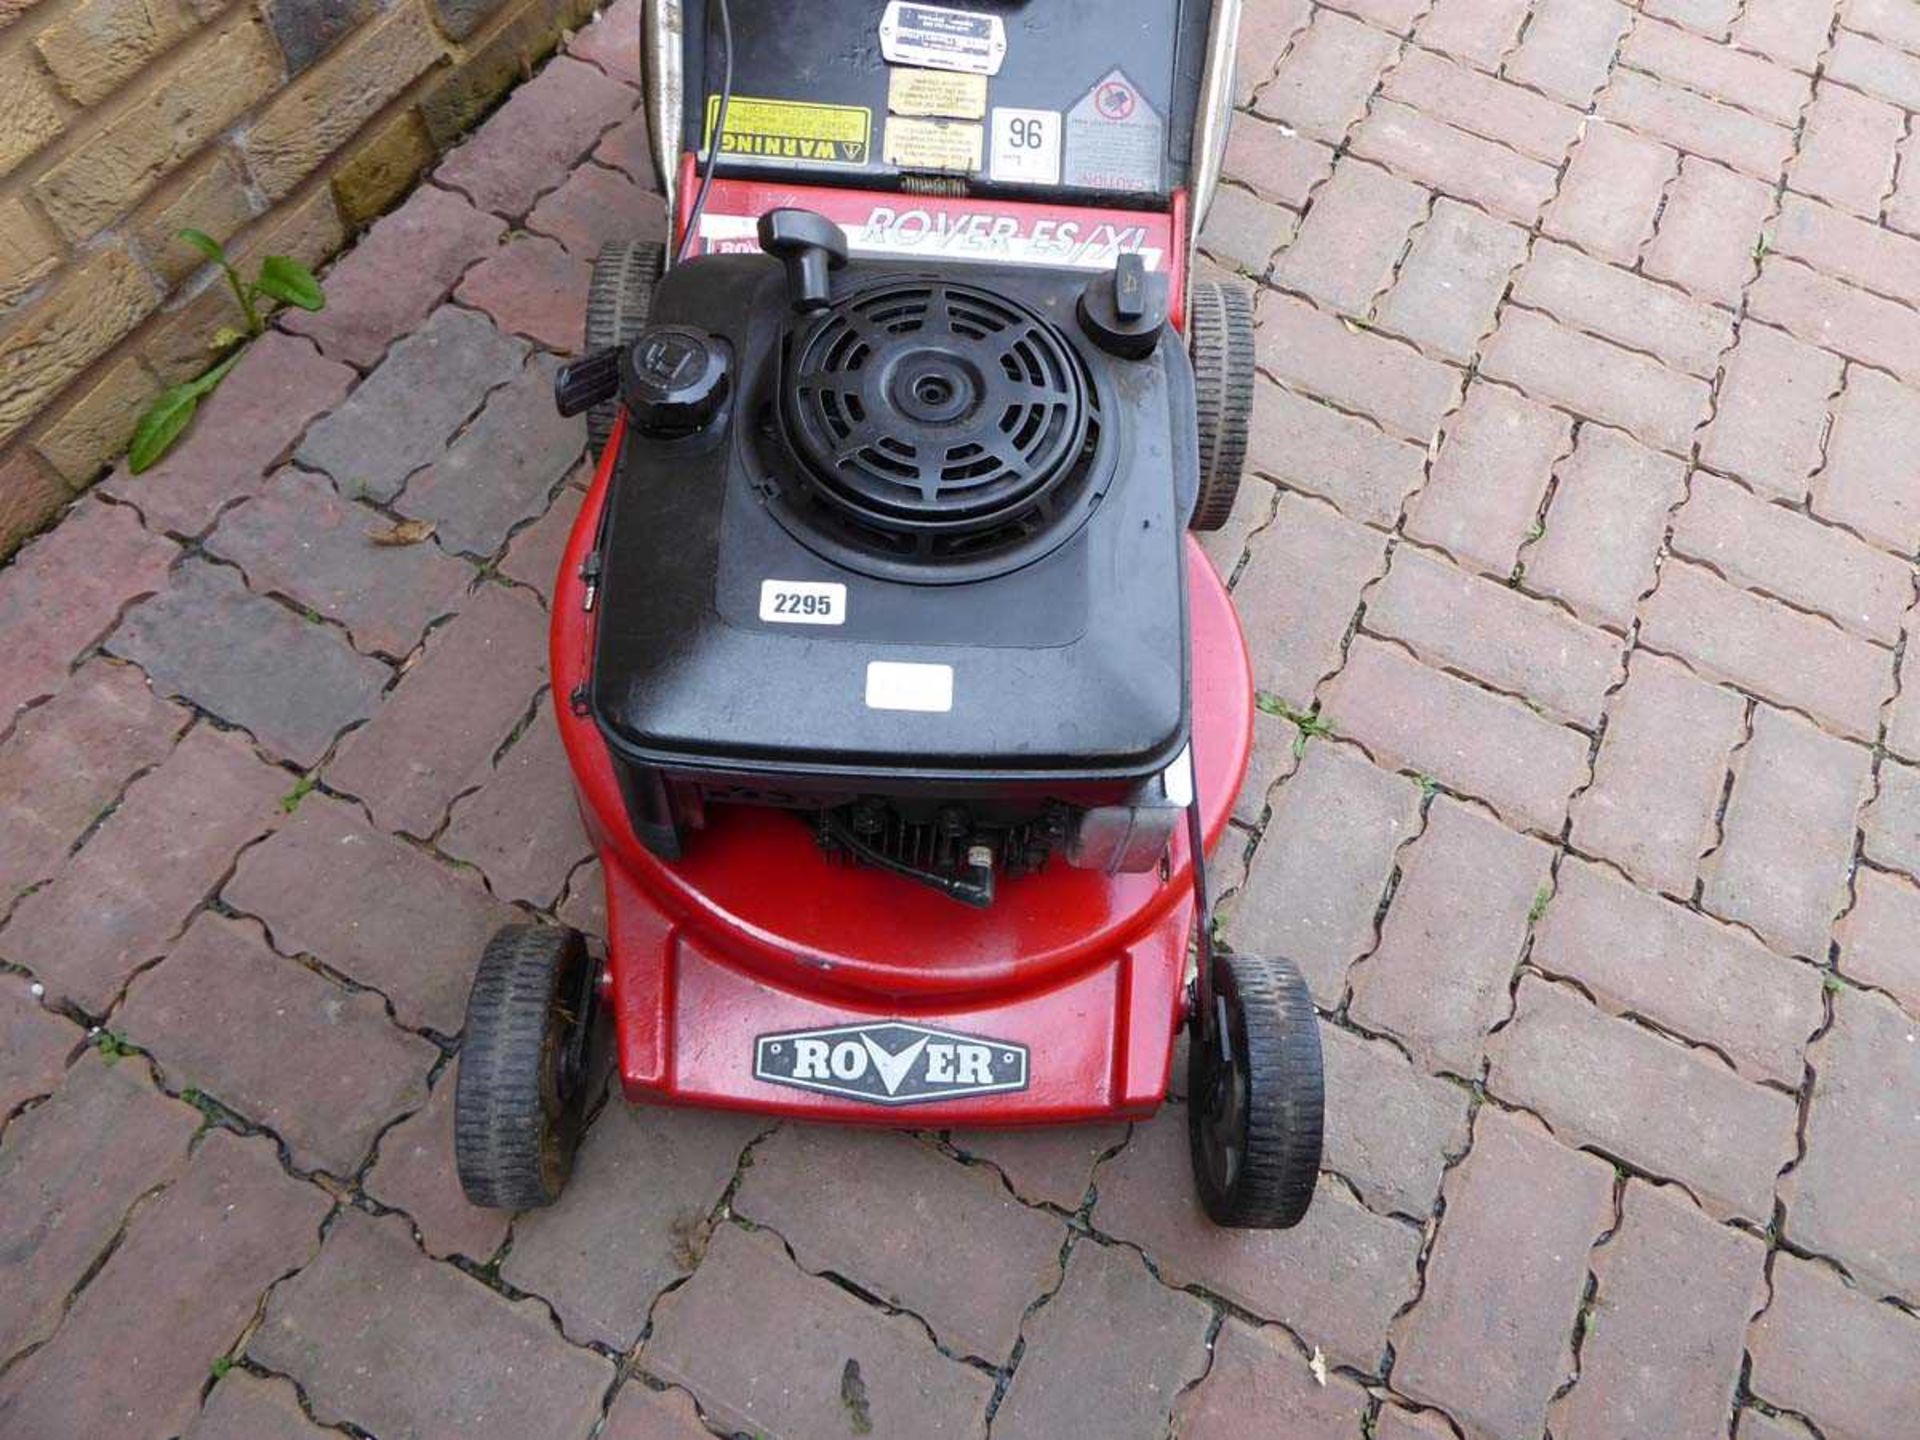 Rover ES-XL hand propelled petrol lawnmower - Image 2 of 2